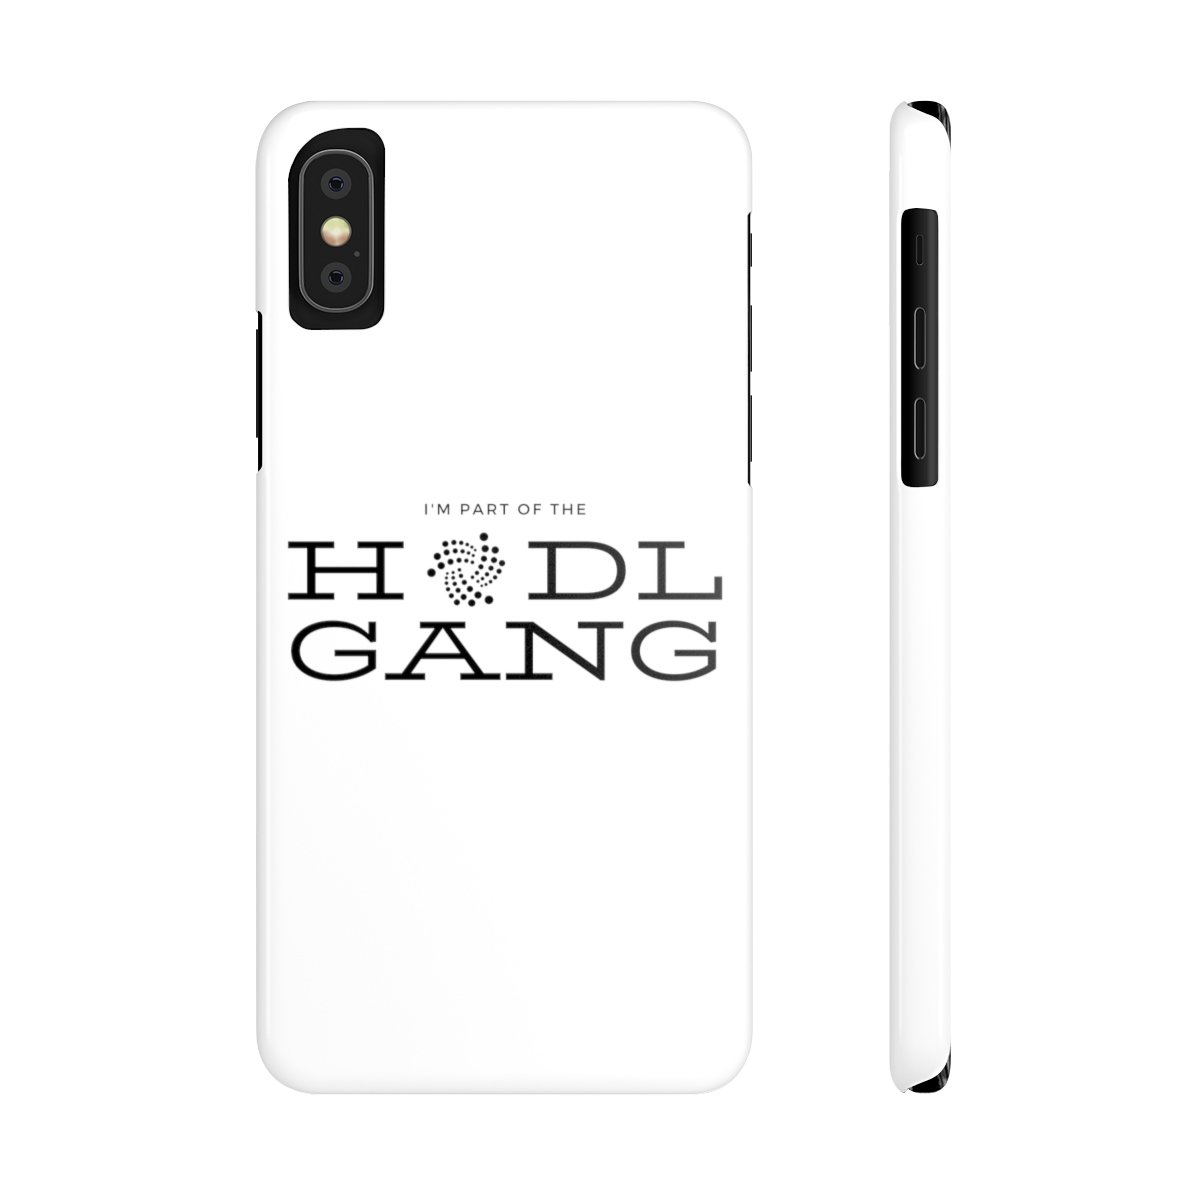 Hodl gang (Iota) - Case Mate Slim Phone Case TCP1607 iPhone XS Official Crypto Merch